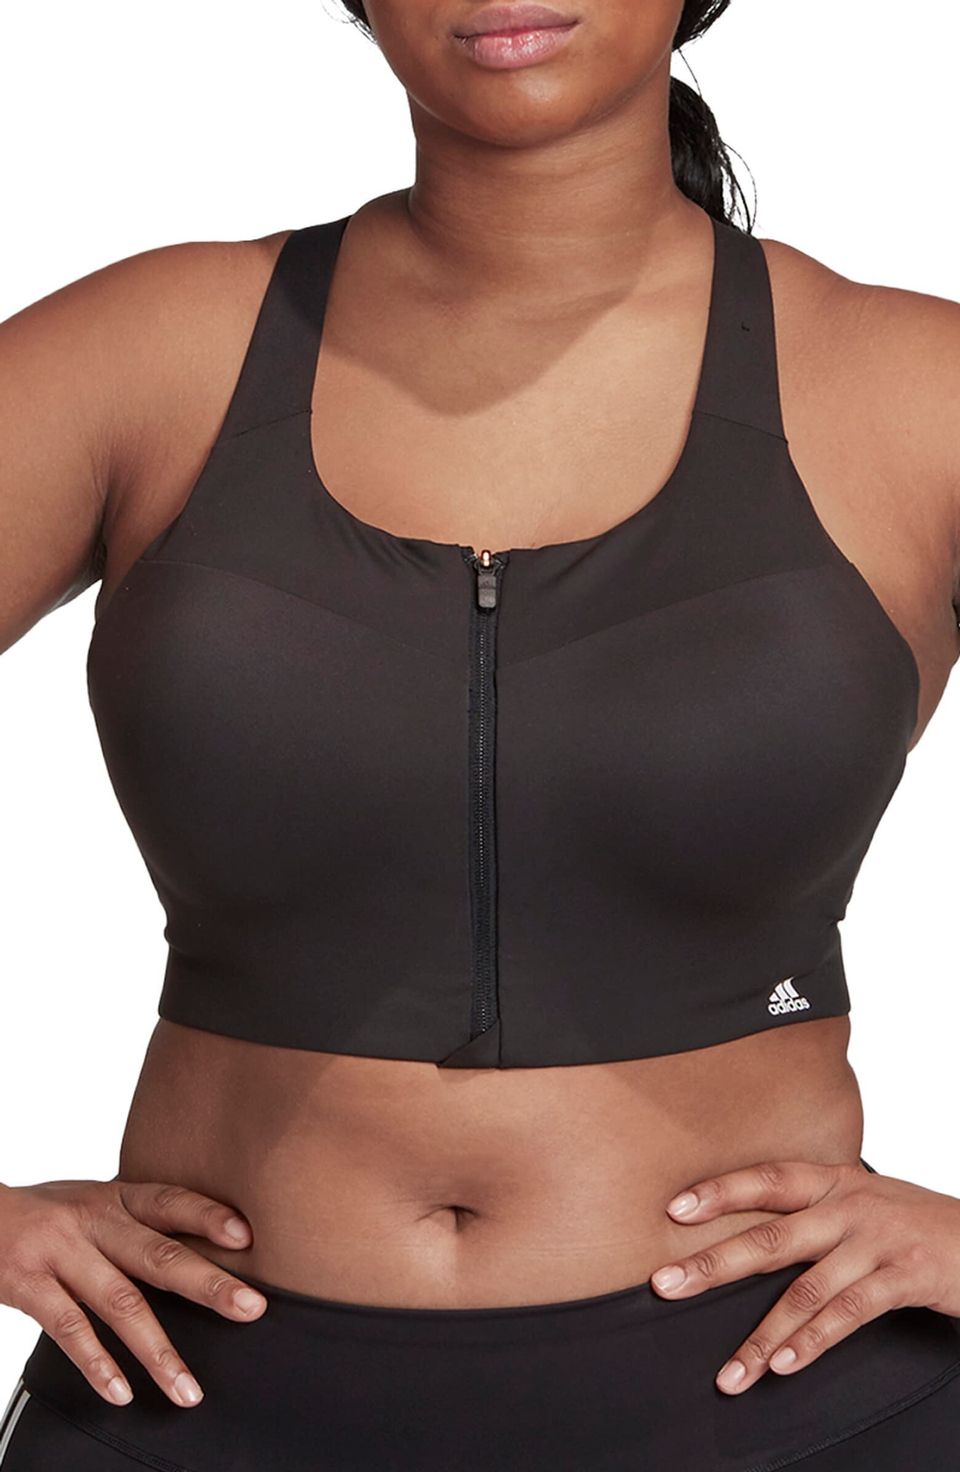 13 Supportive Sports Bras That Hook In The Front